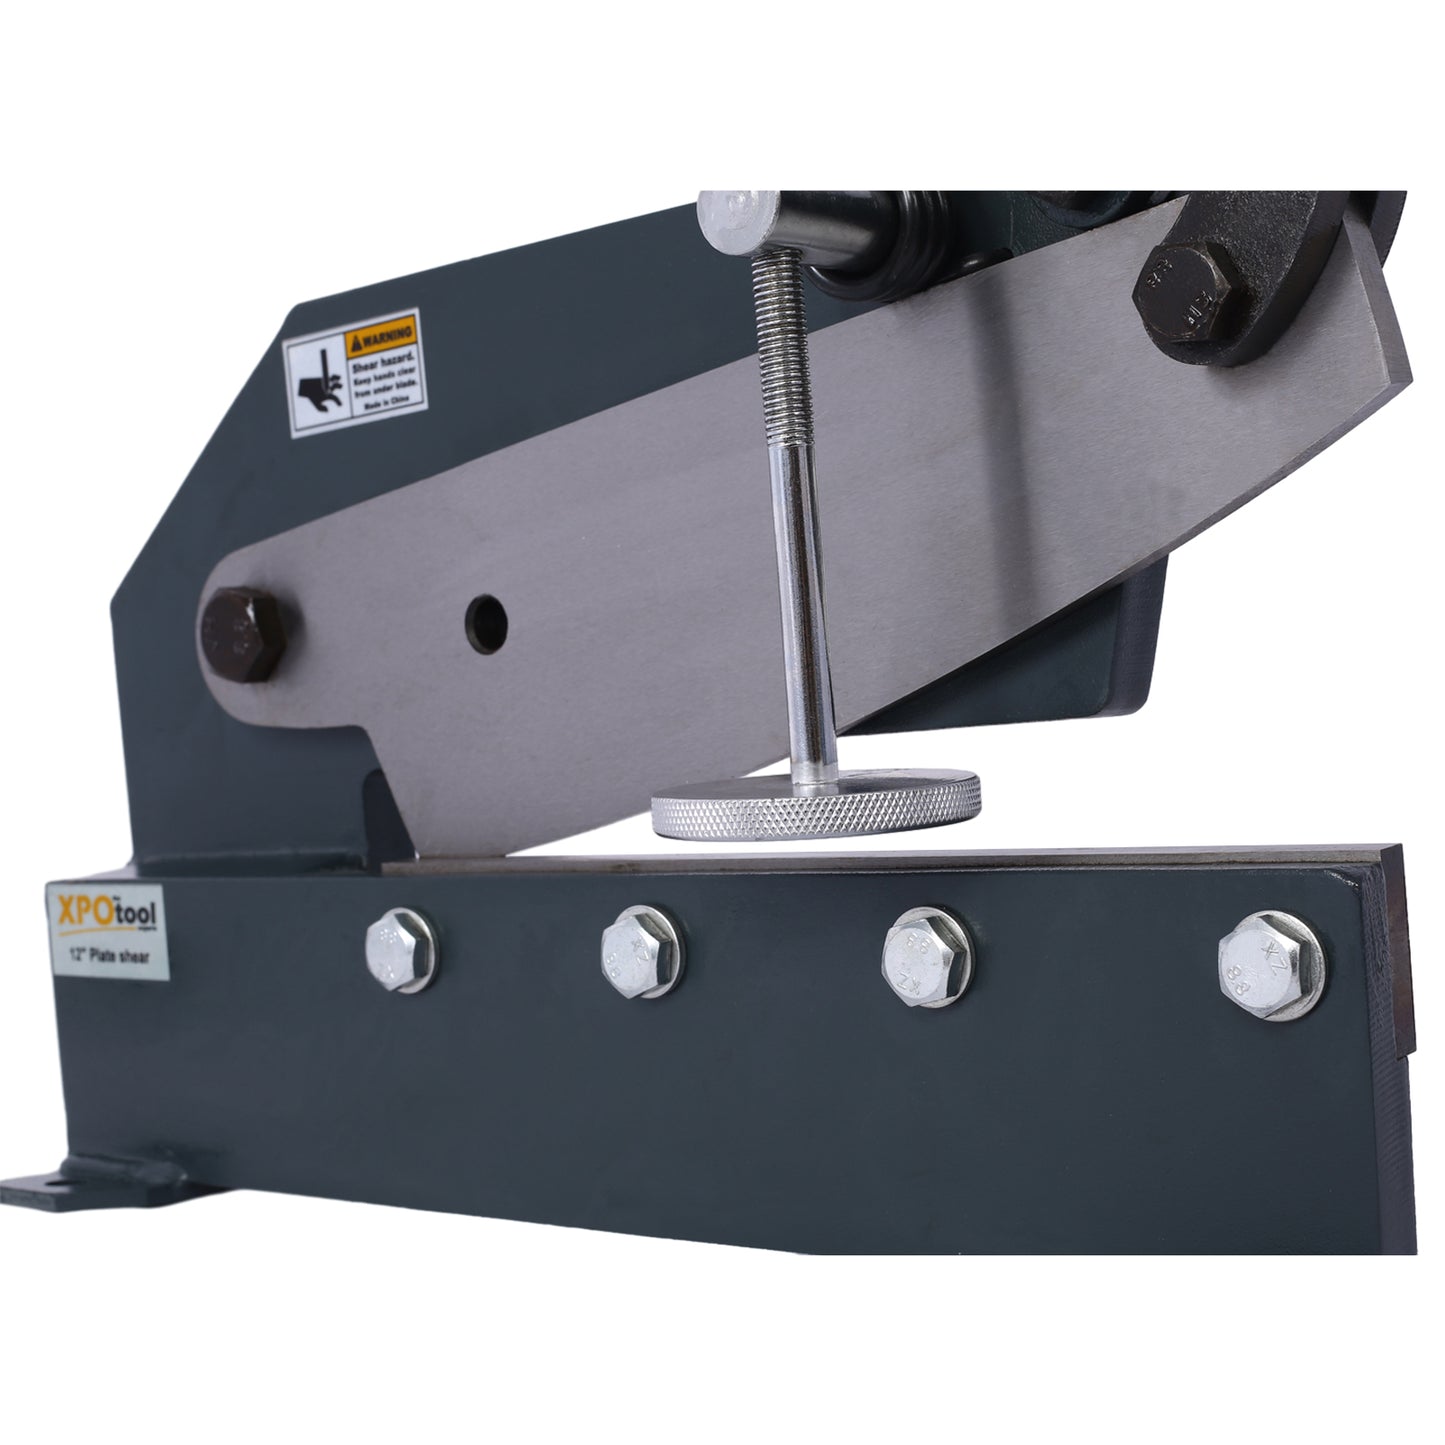 Industrial 12-Inch Sheet Metal Plate Shear, Solid Construction Mounting Type Metal Shear, High Precision Manual Hand Plate Shear